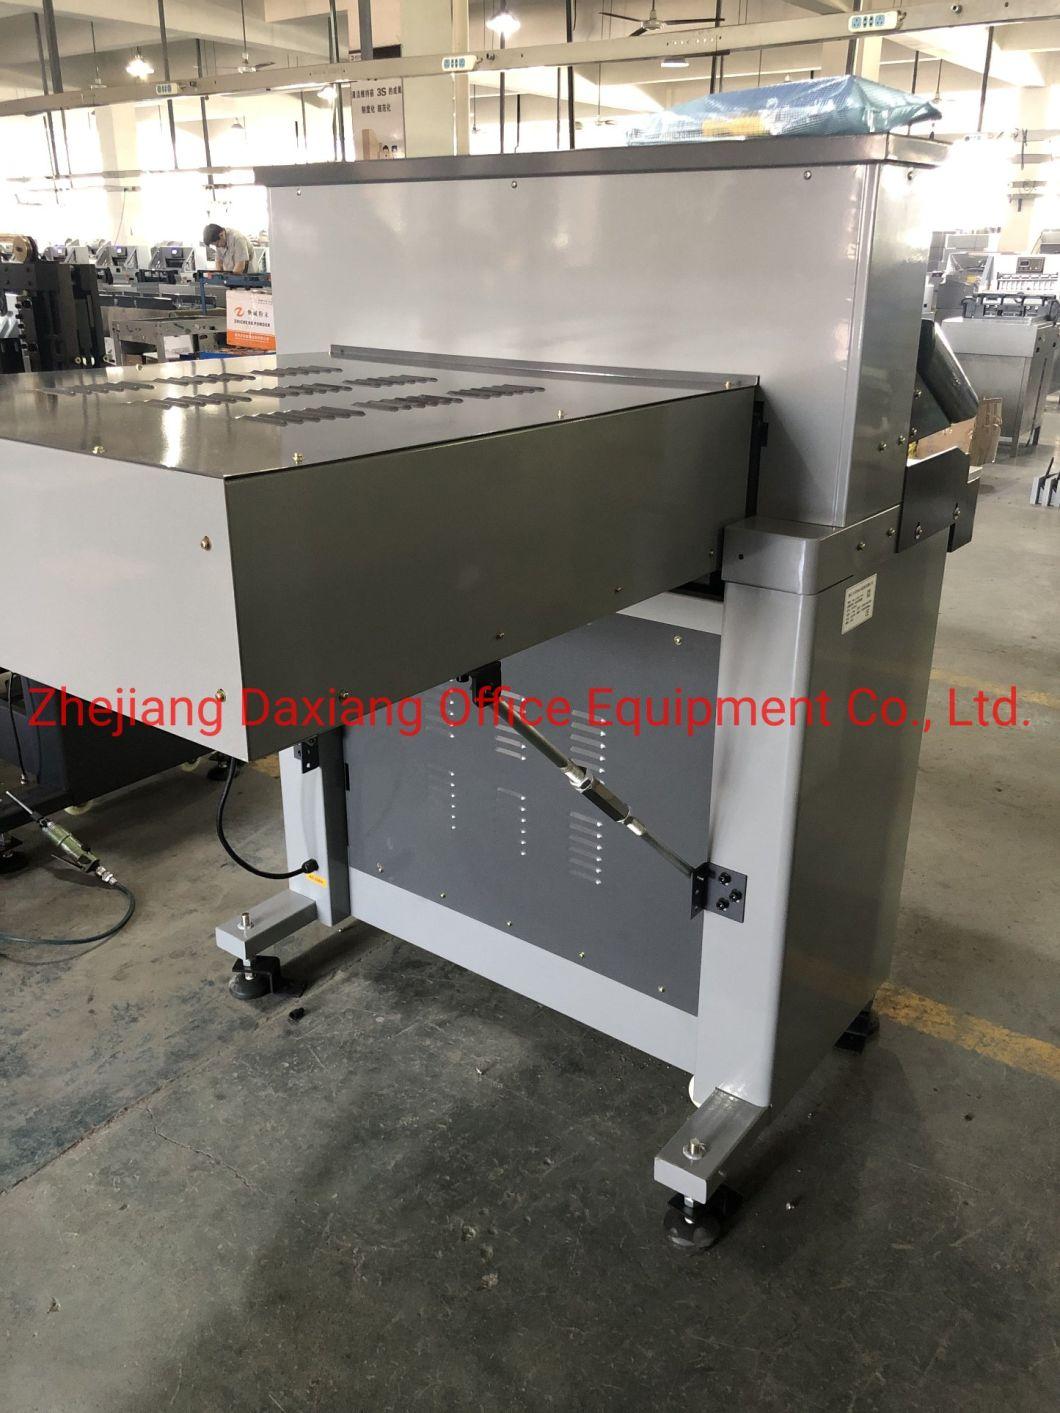 Hot Selling Good Quality Paper Cutting Machine Guillotine (FN-H670TV7)